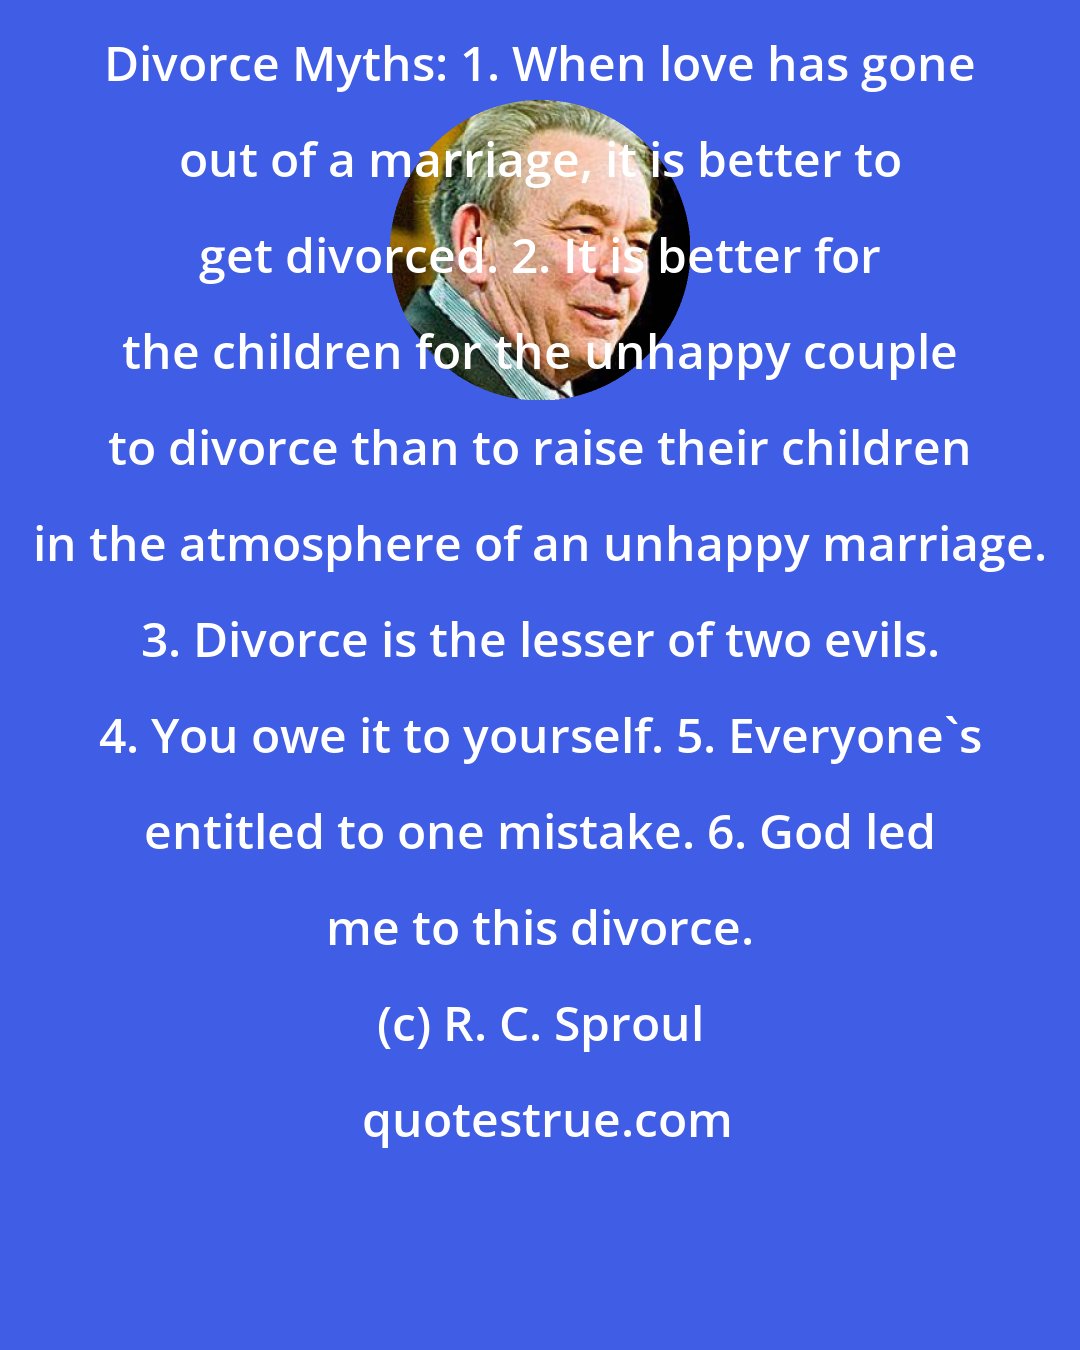 R. C. Sproul: Divorce Myths: 1. When love has gone out of a marriage, it is better to get divorced. 2. It is better for the children for the unhappy couple to divorce than to raise their children in the atmosphere of an unhappy marriage. 3. Divorce is the lesser of two evils. 4. You owe it to yourself. 5. Everyone's entitled to one mistake. 6. God led me to this divorce.